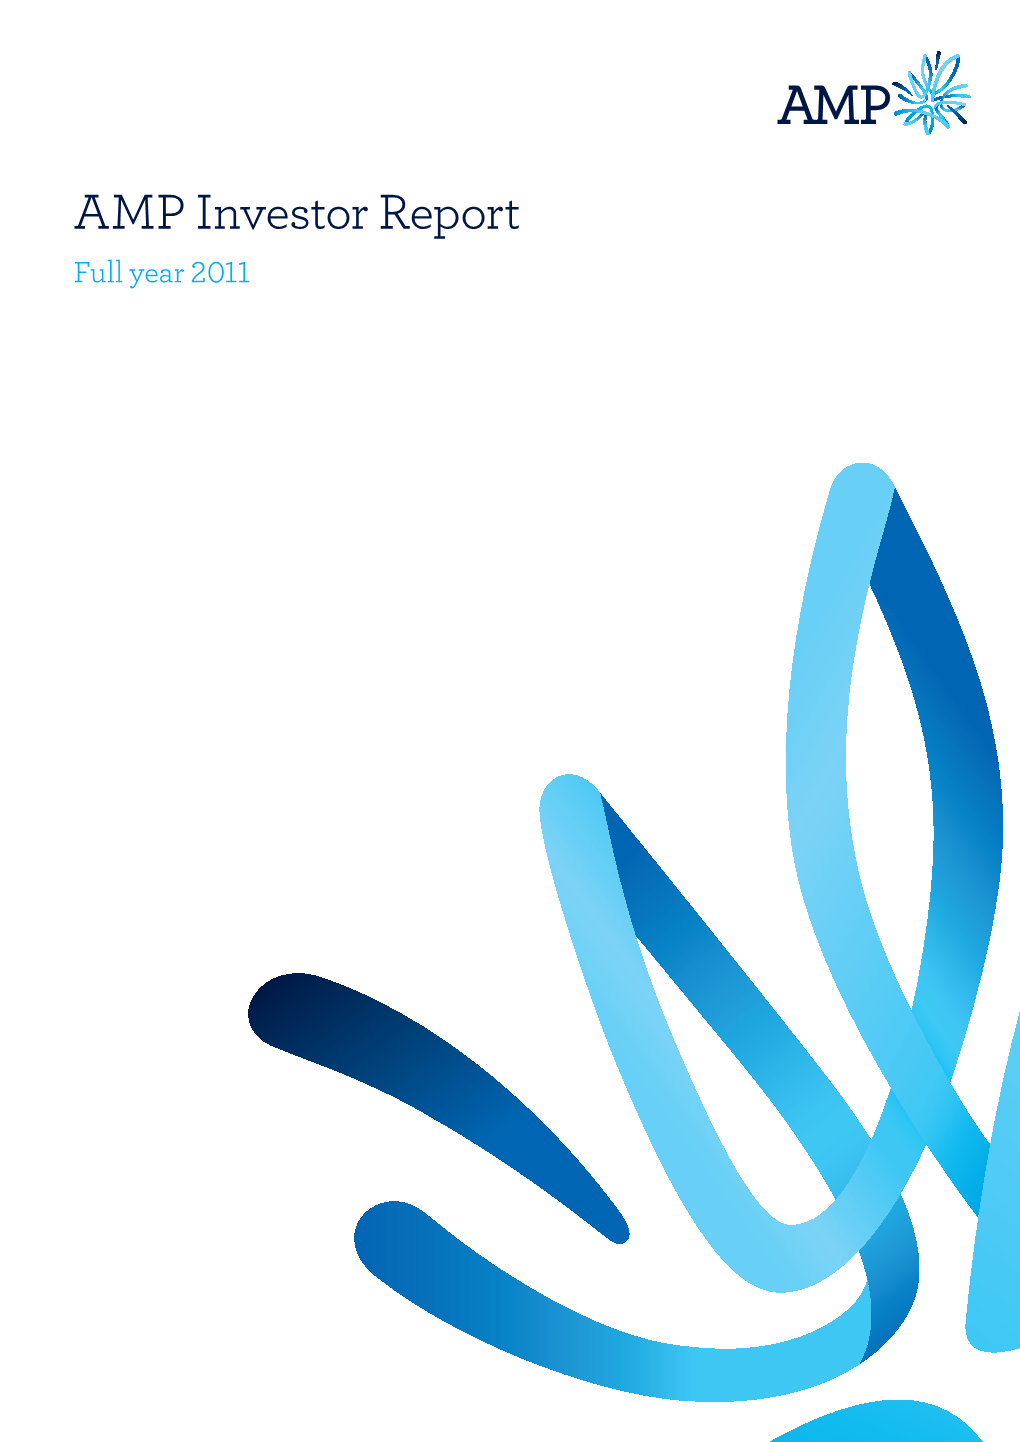 AMP Investor Report Full Year 2011 Management and Contact Details